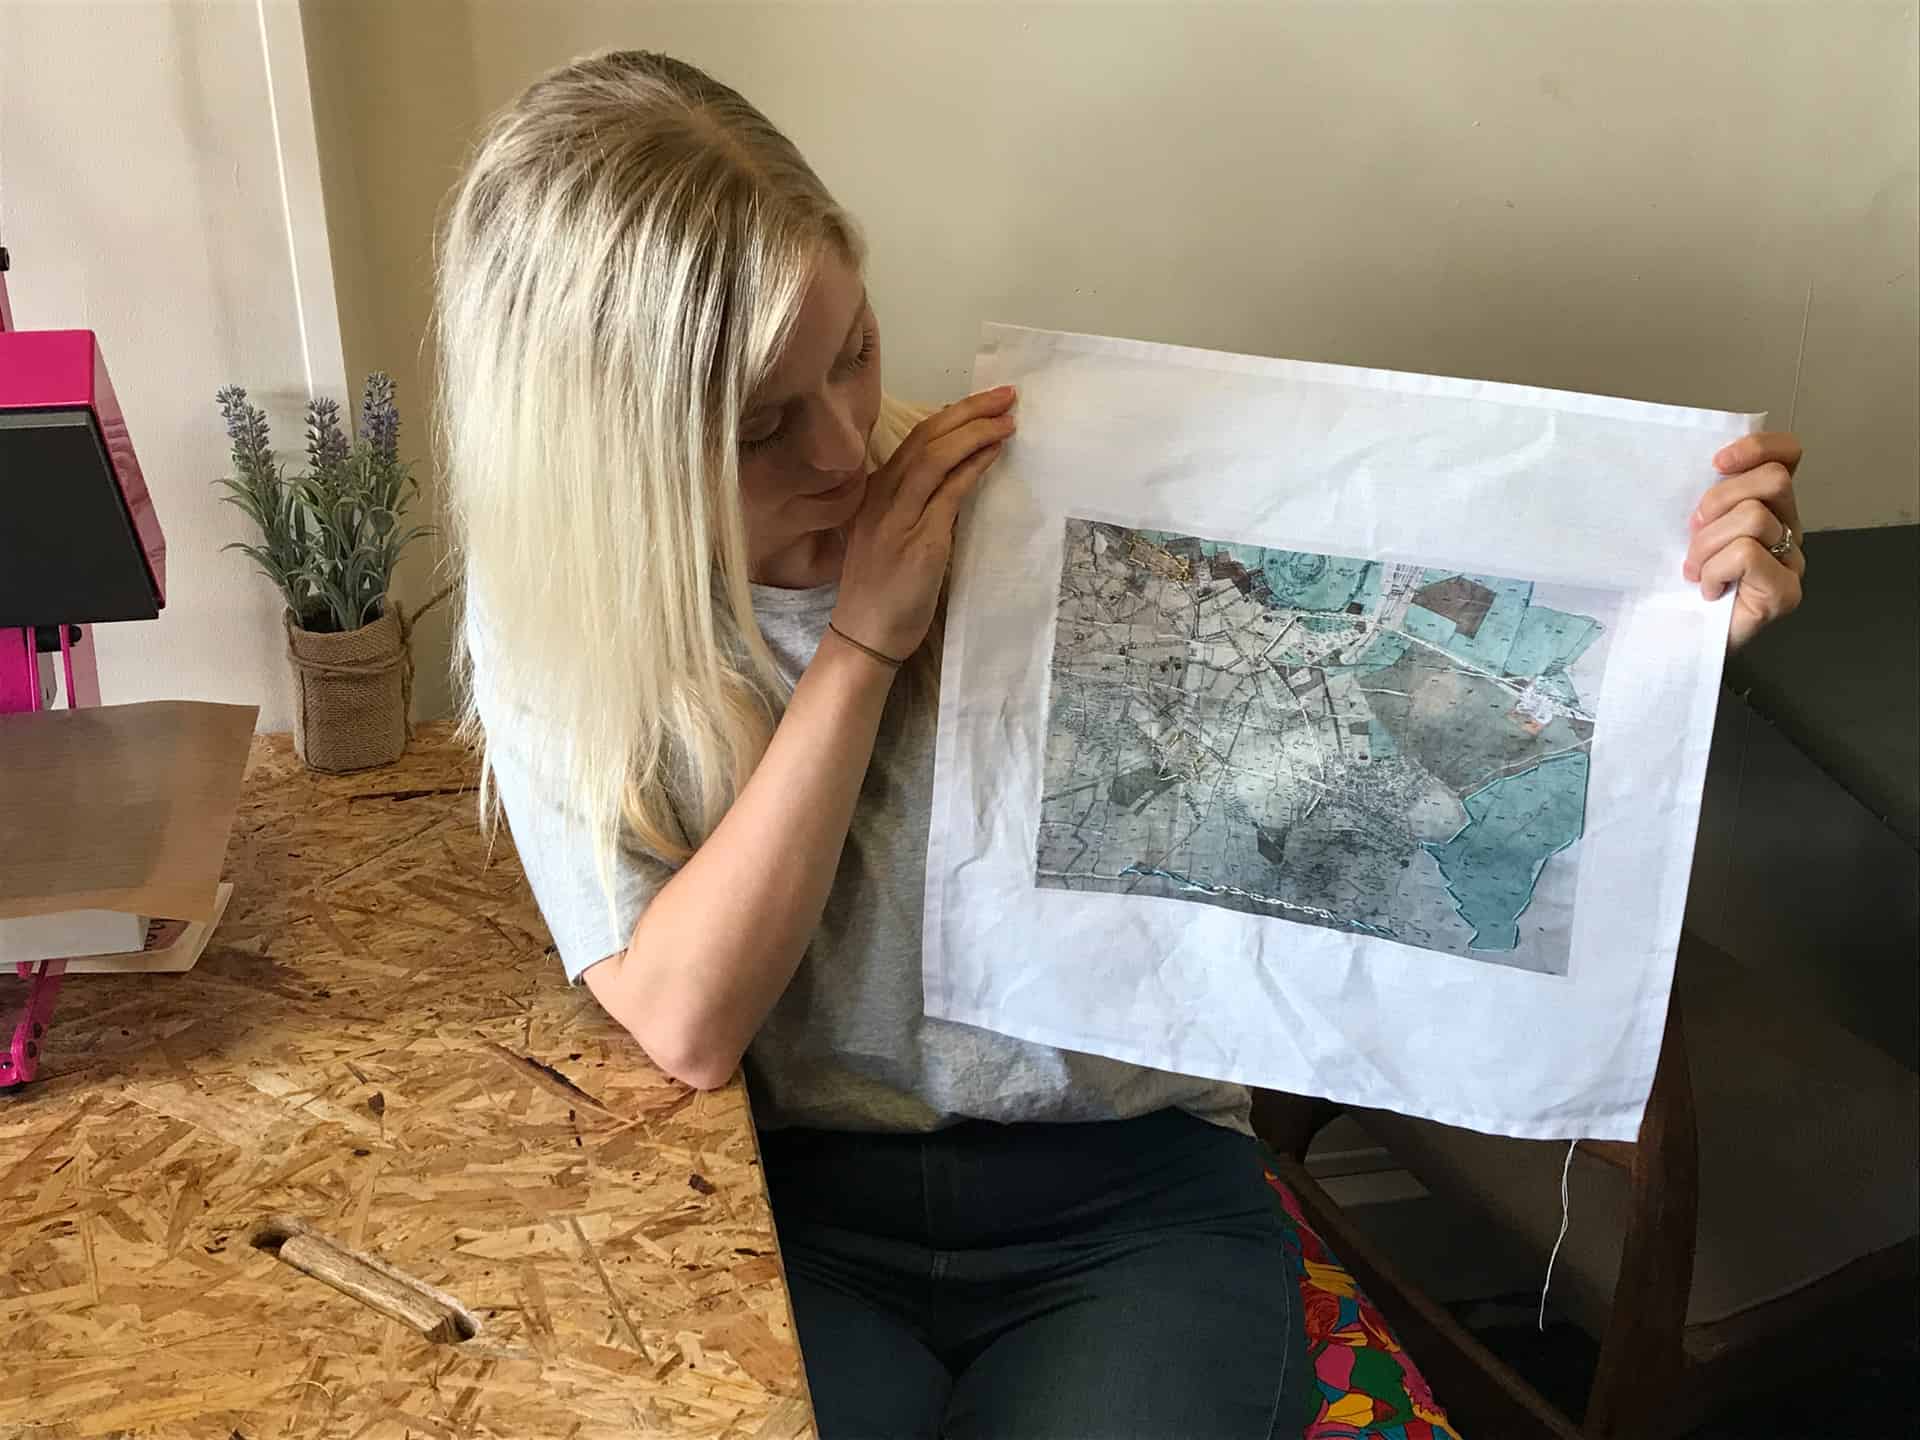 Janes printed fabric showing old maps of Dudley.  Her stitches highlight the areas she knows. 